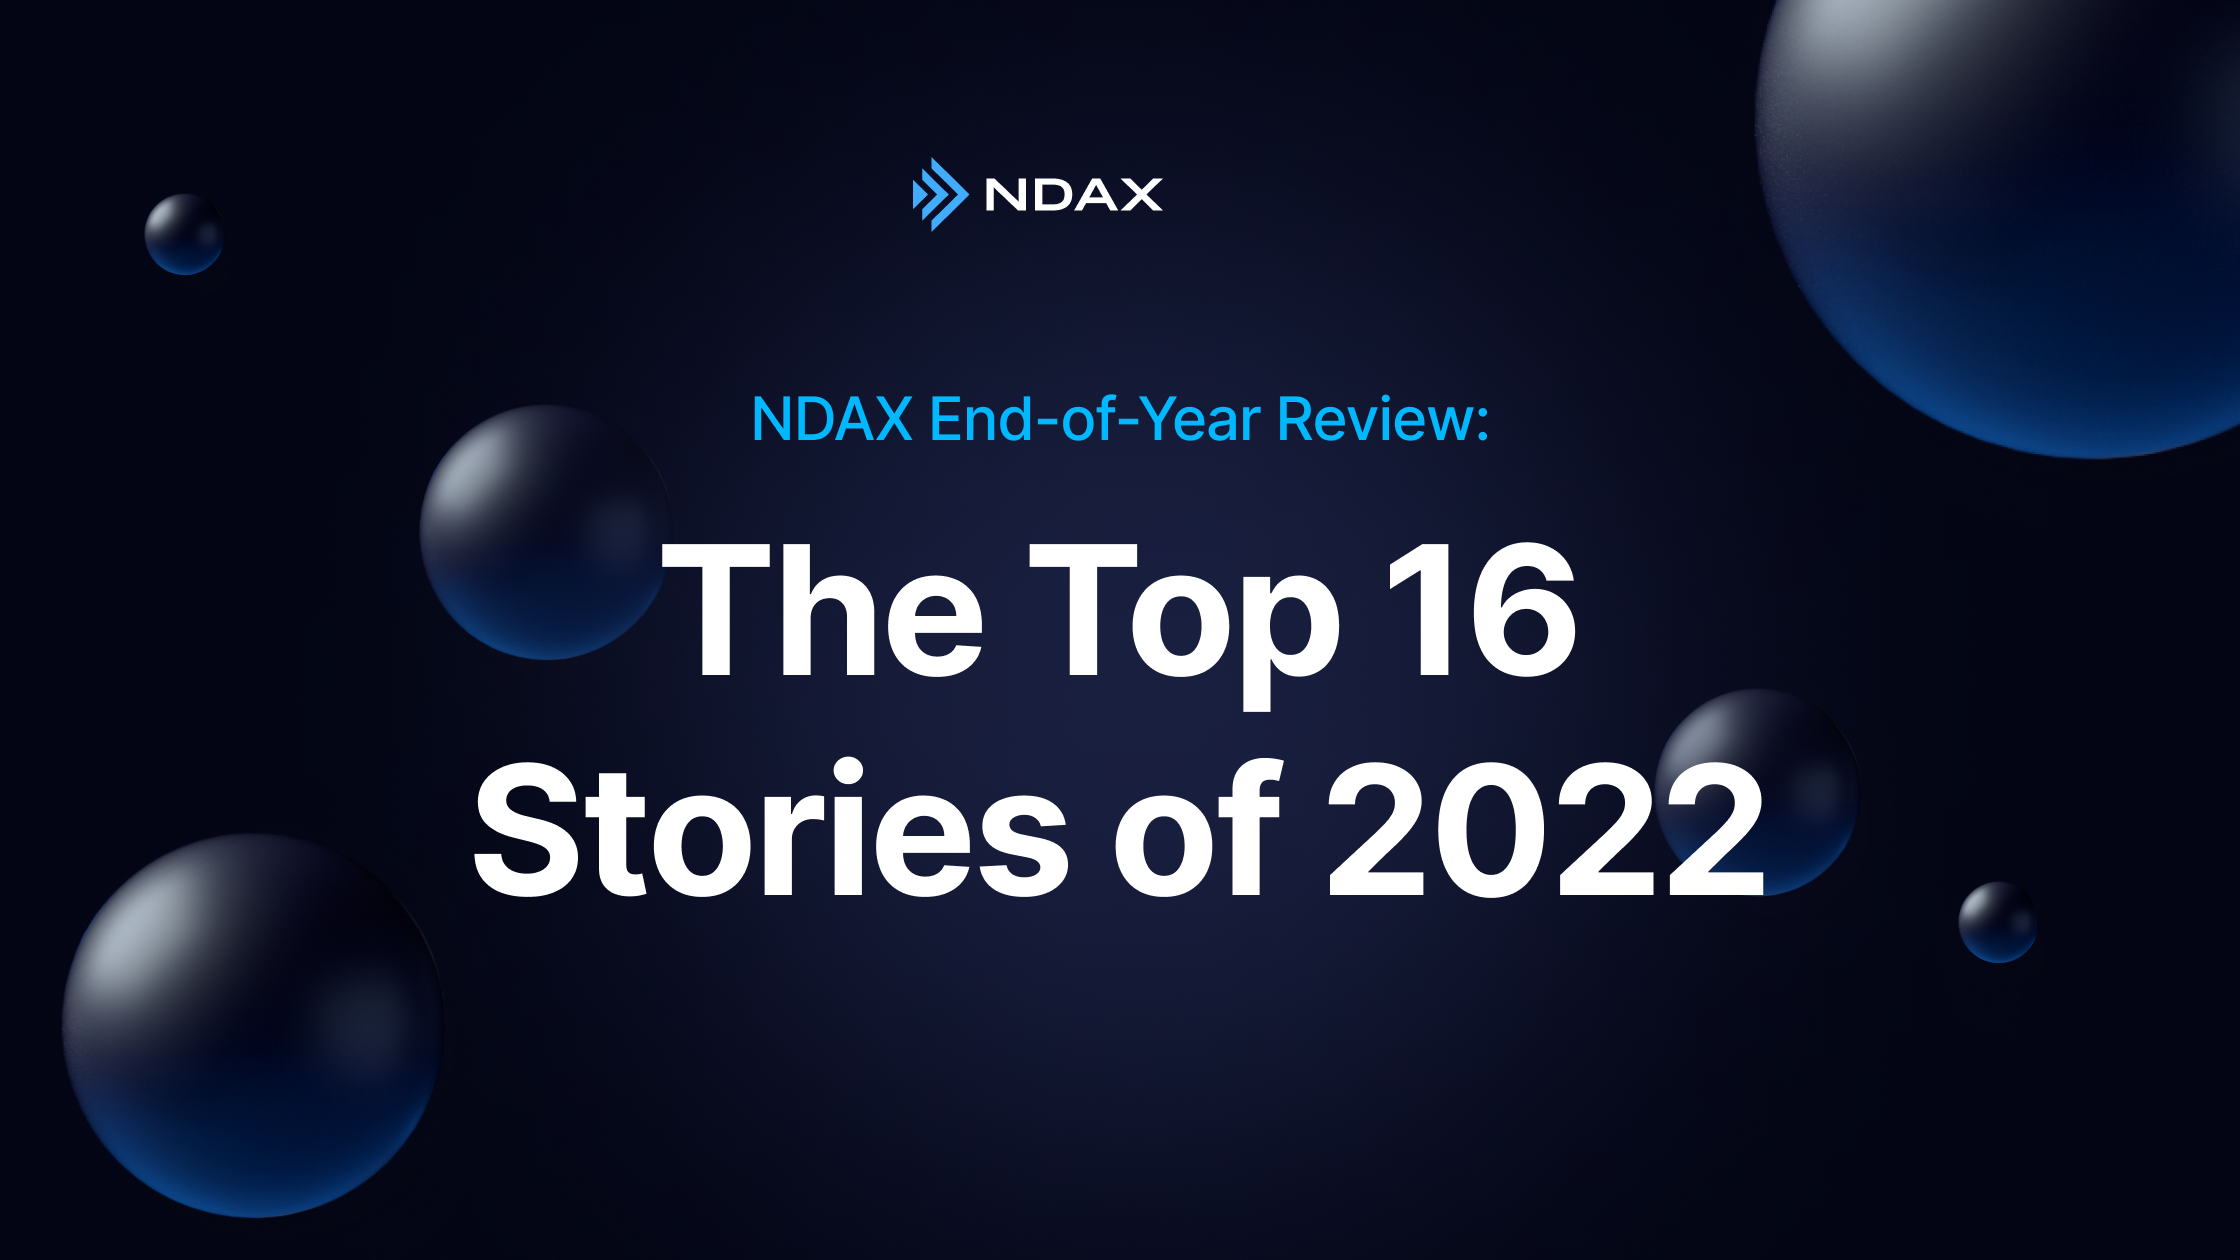 NDAX End-of-Year Review: 
The Top Sixteen Stories of 2022